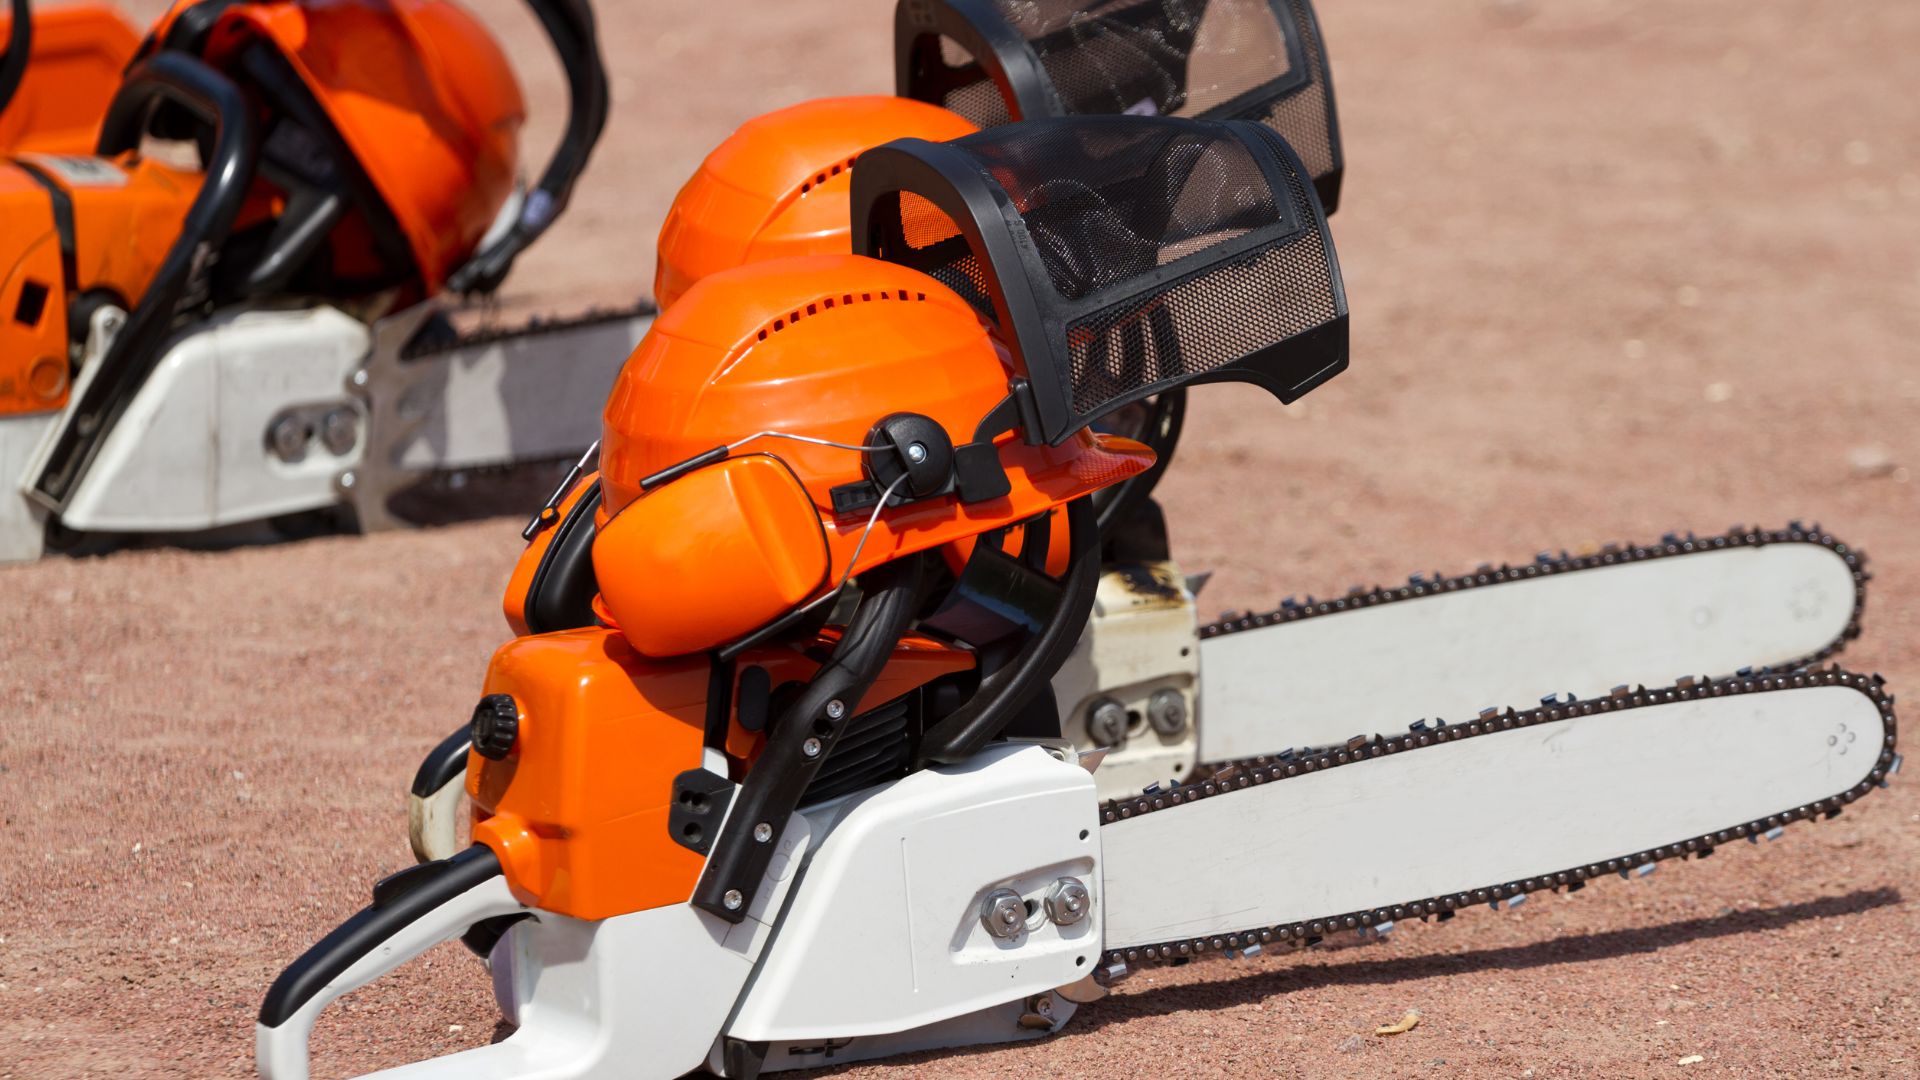 Where Are Chainsaws Made? A Guide To Chainsaw Manufacturing Locations